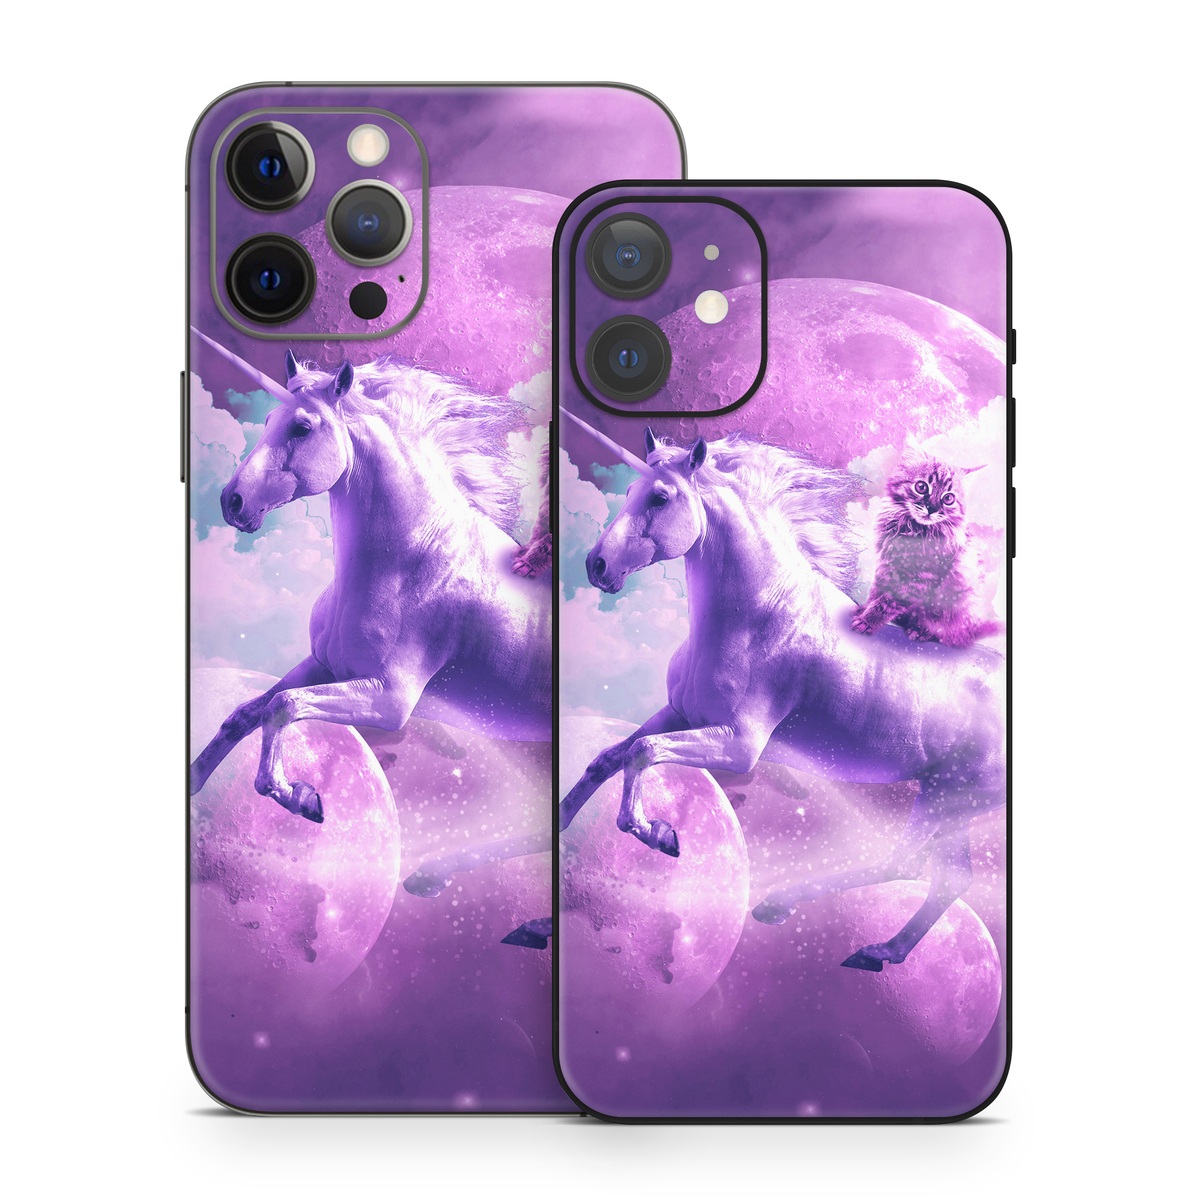 iPhone 12 Series Skin design of Unicorn, Purple, Fictional character, Mythical creature, Violet, Cg artwork, Illustration, Mythology, with white, purple, blue, gray, black colors